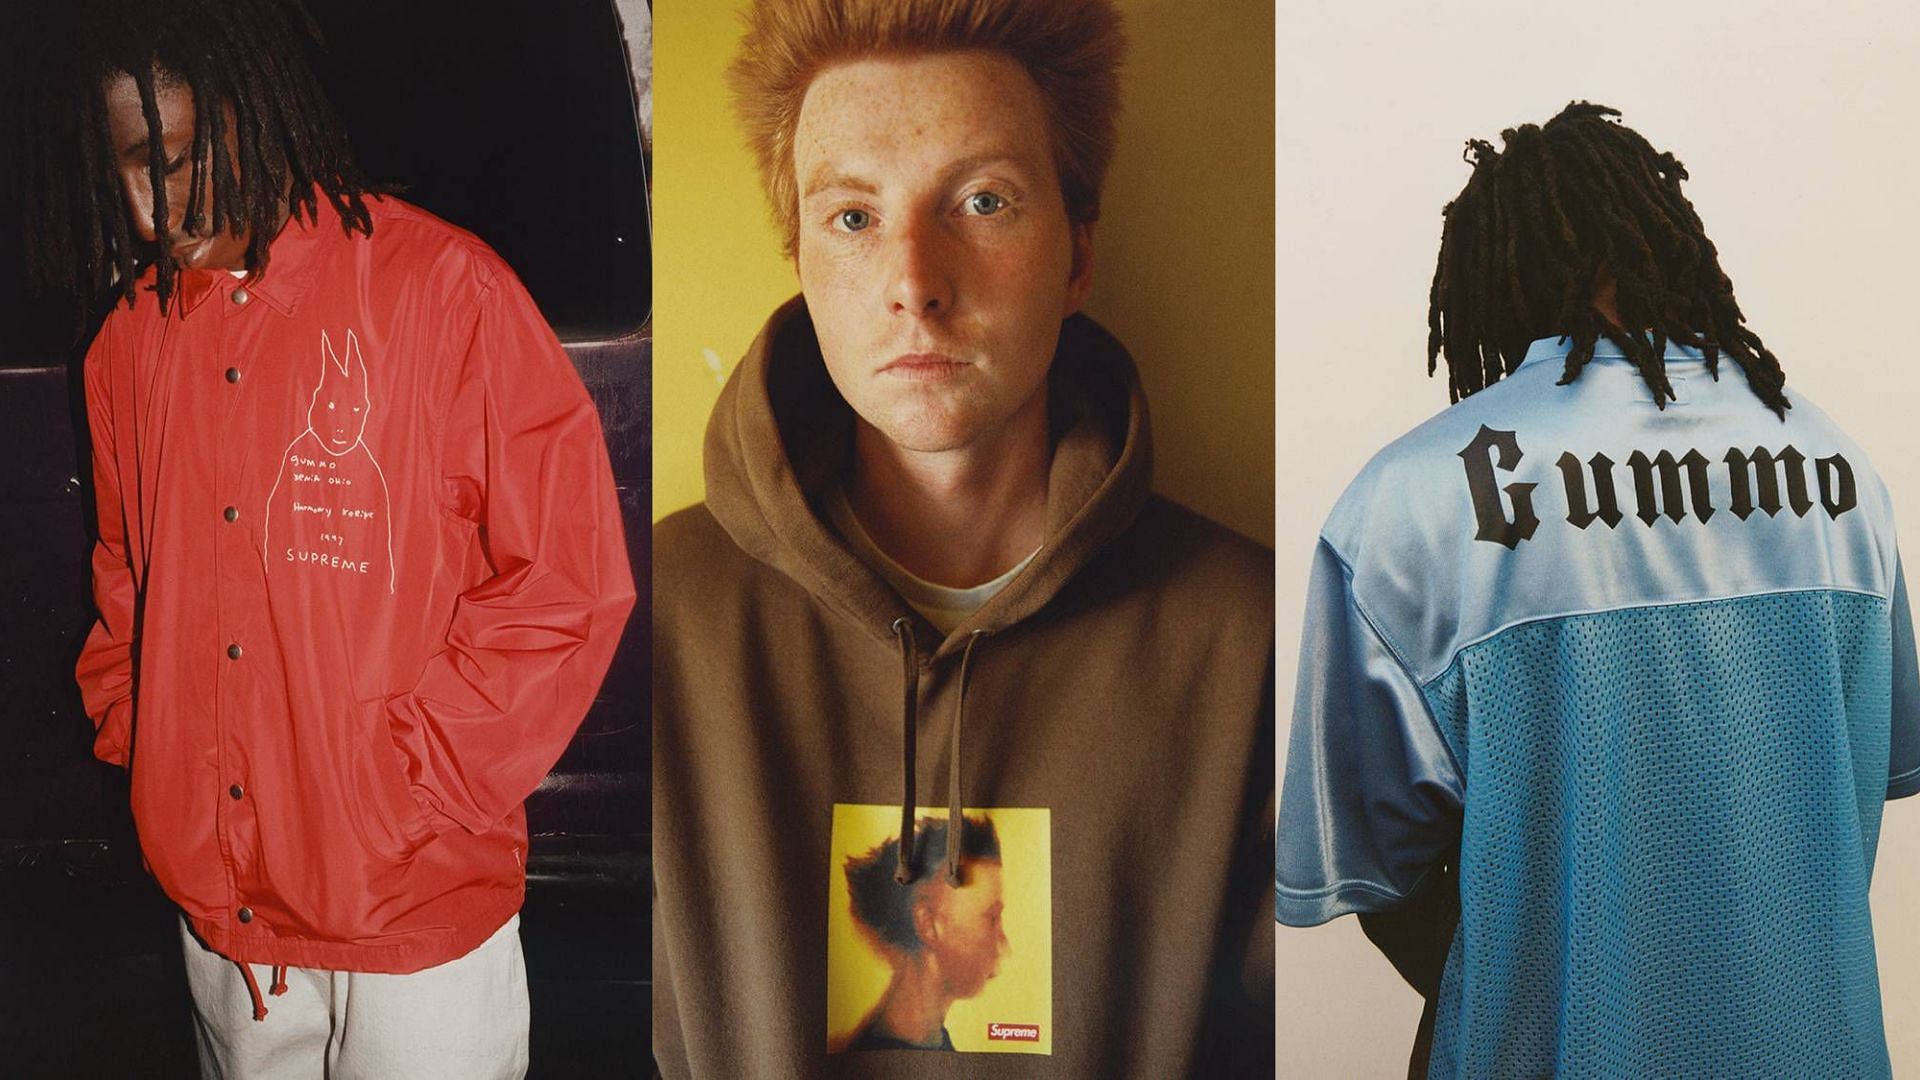 Supreme X Gummo collection: Where to buy, release date, and more 